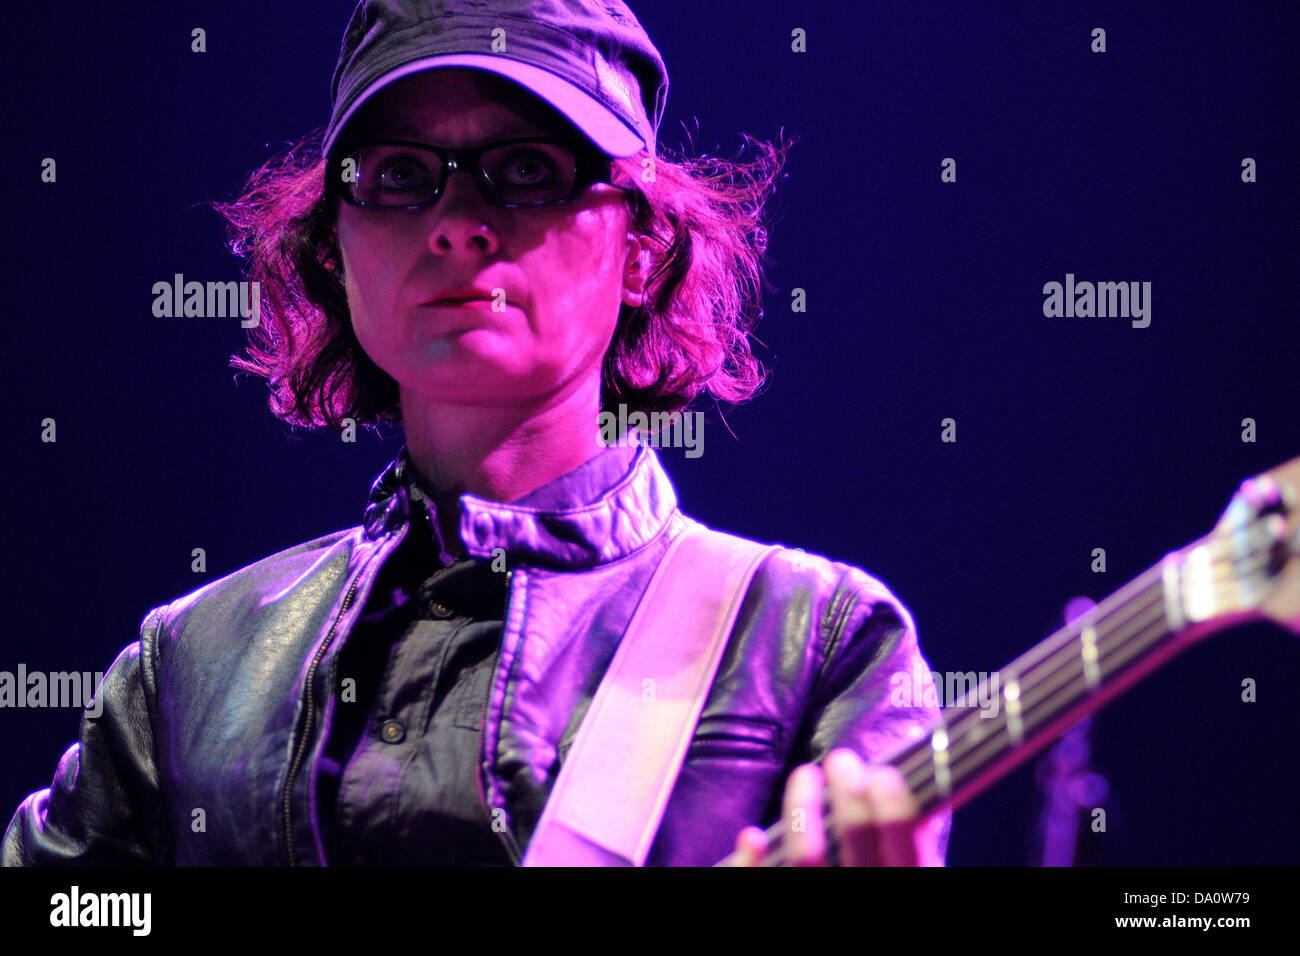 BARCELONA - MAY 24: Josephine Wiggs, bass player for The Breeders band ...